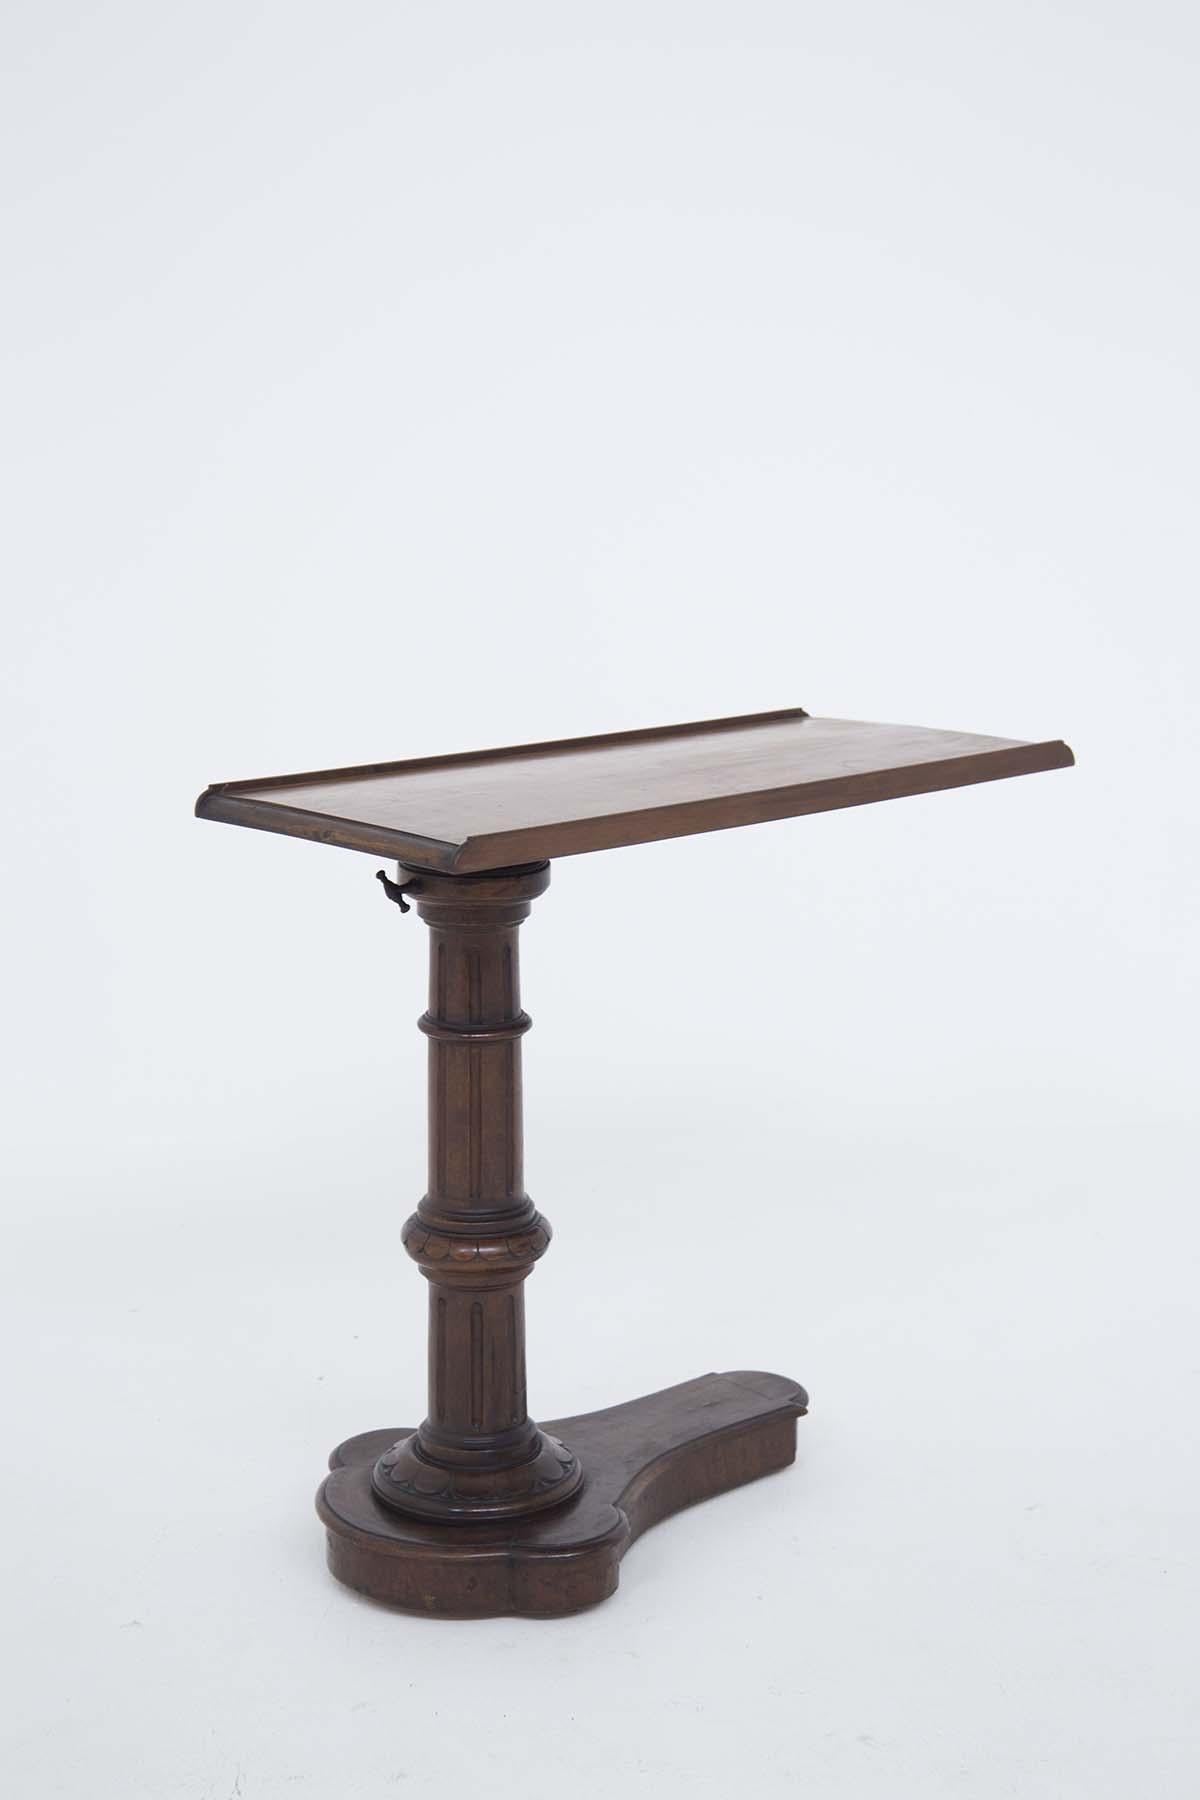 Victorian Era English Adjustable Serving Table in Wood 2